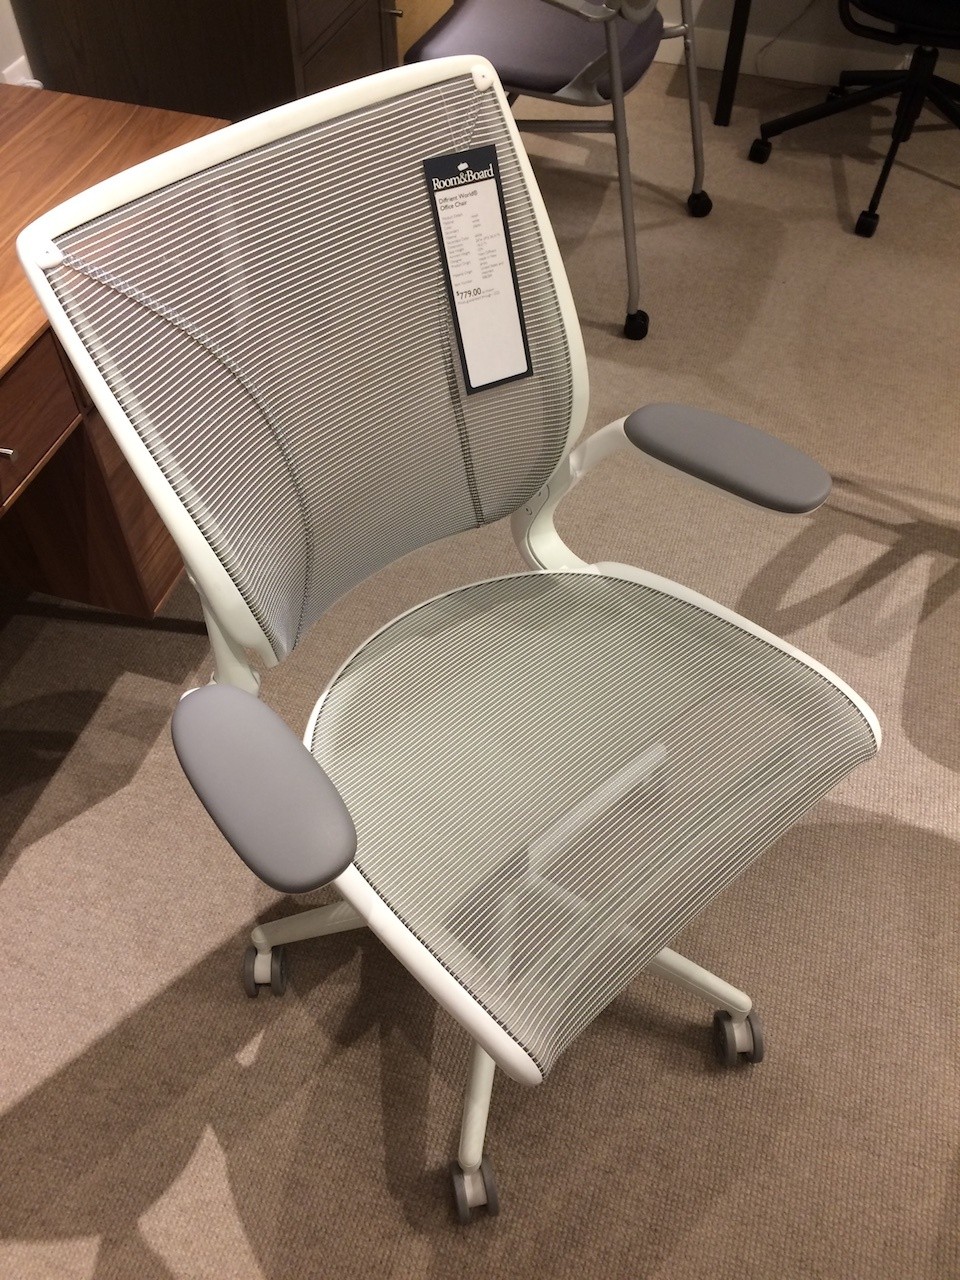 Humanscale Diffrient World Chair front overhead view